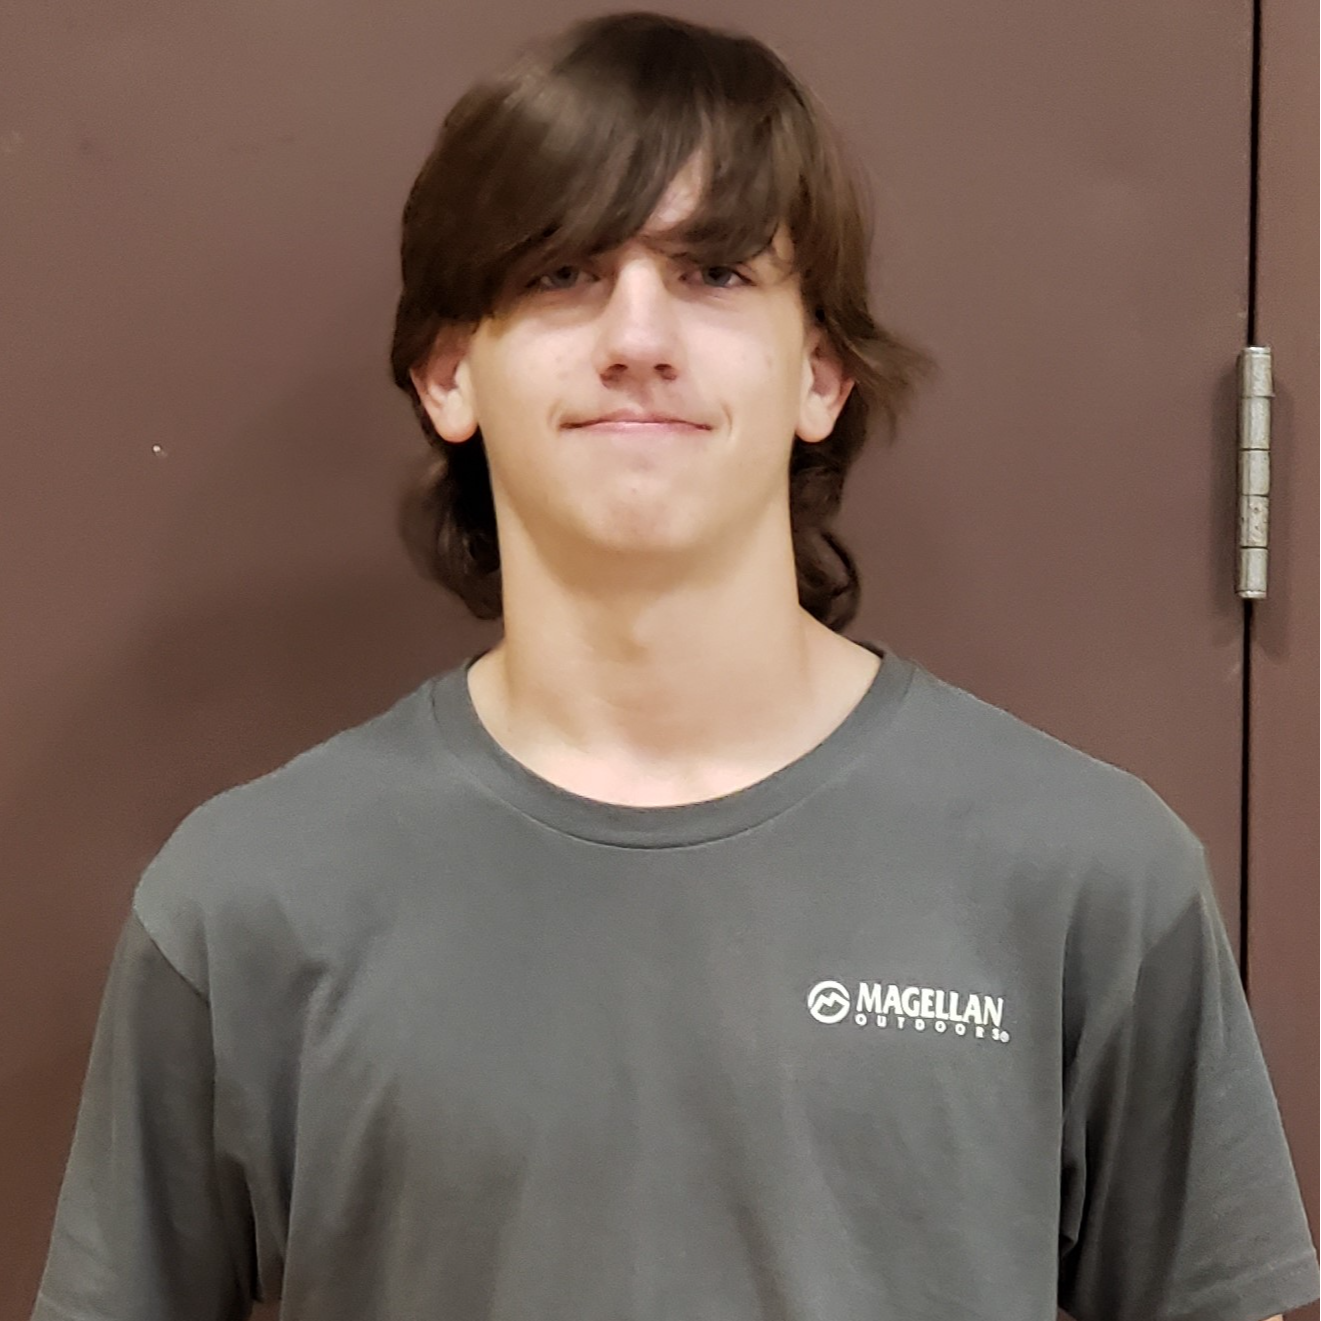 young man with brown hair hanging in his eyes wearing a dark gray t-shirt